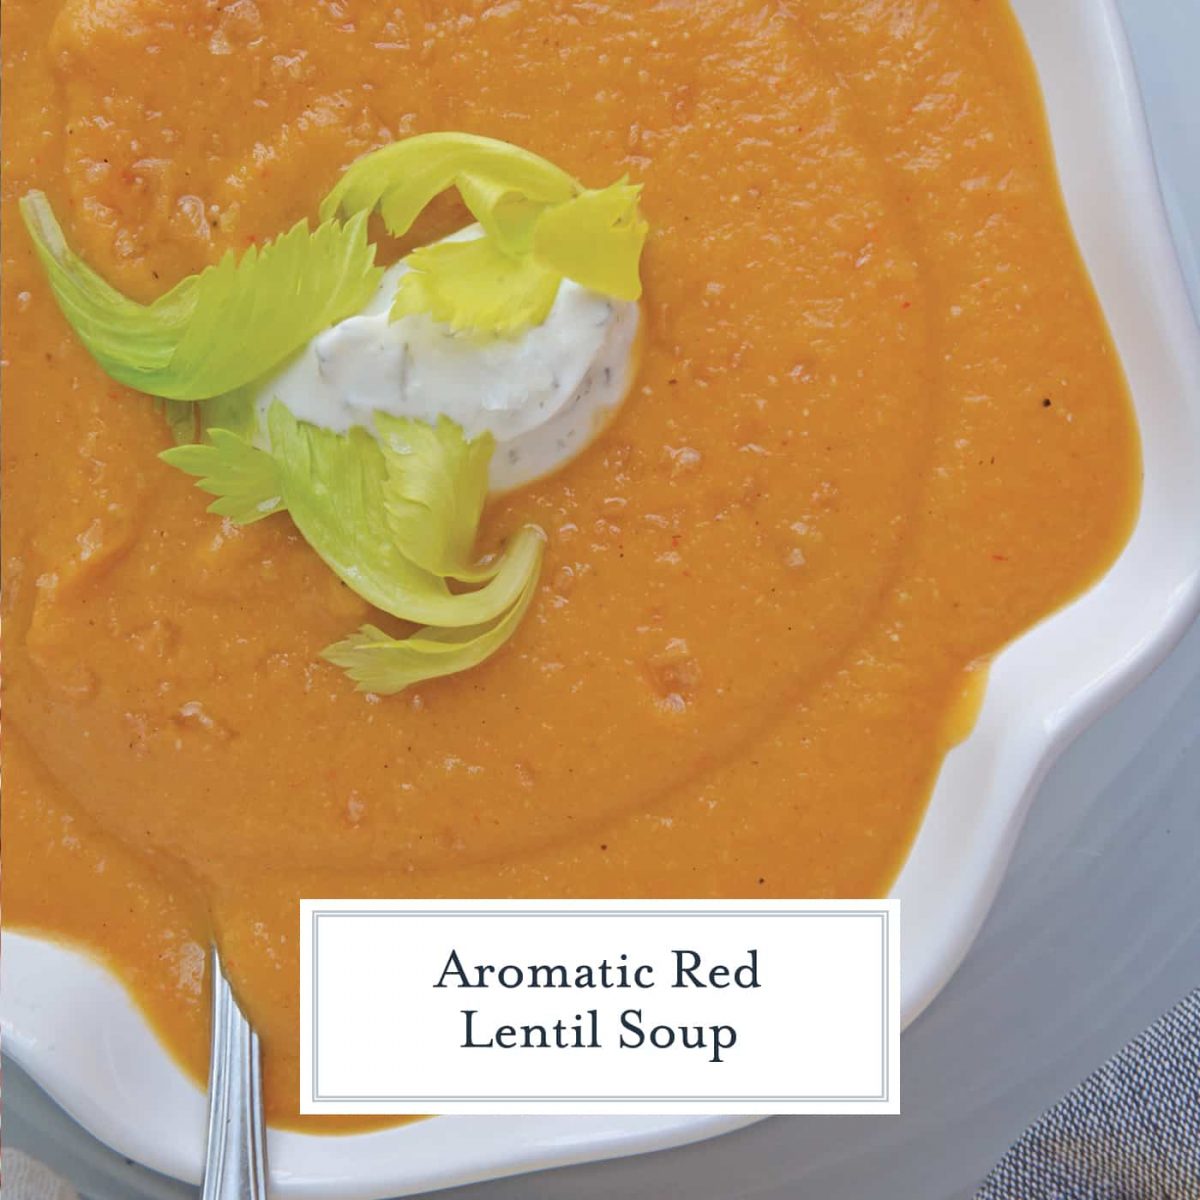 Red Lentil Soup is the best comfort food for a cold or rainy day. Packed full of vegetables and spices, this easy soup recipe is hearty enough for a meal. #lentilsouprecipes #redlentilrecipes www.savoryexperiments.com